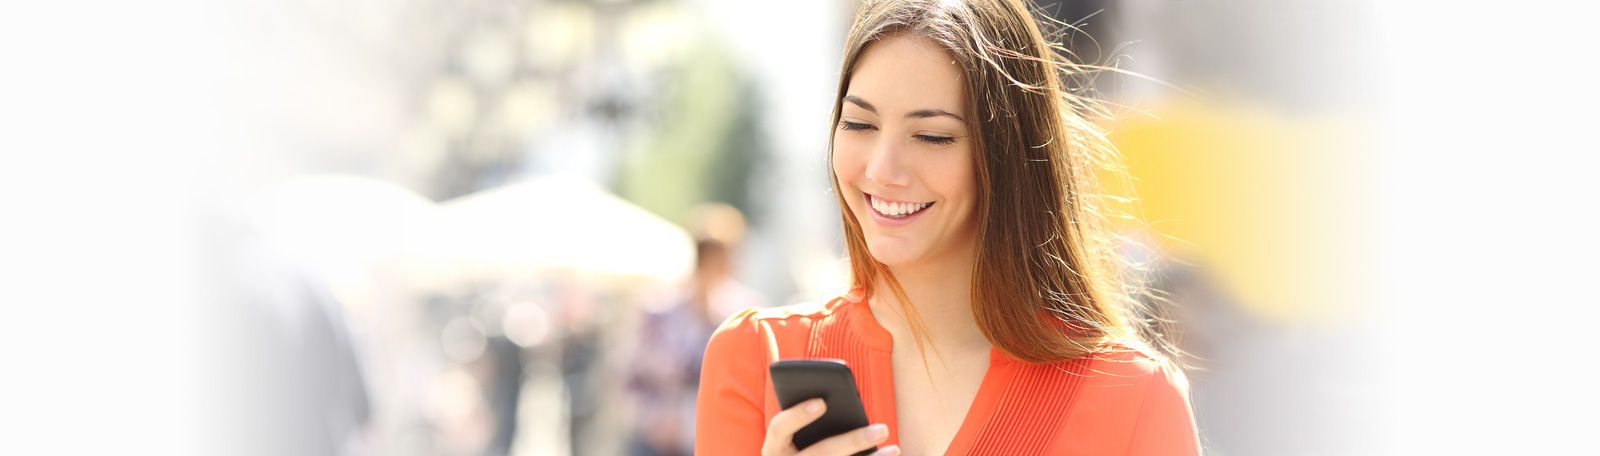 attractive woman smiling with phone